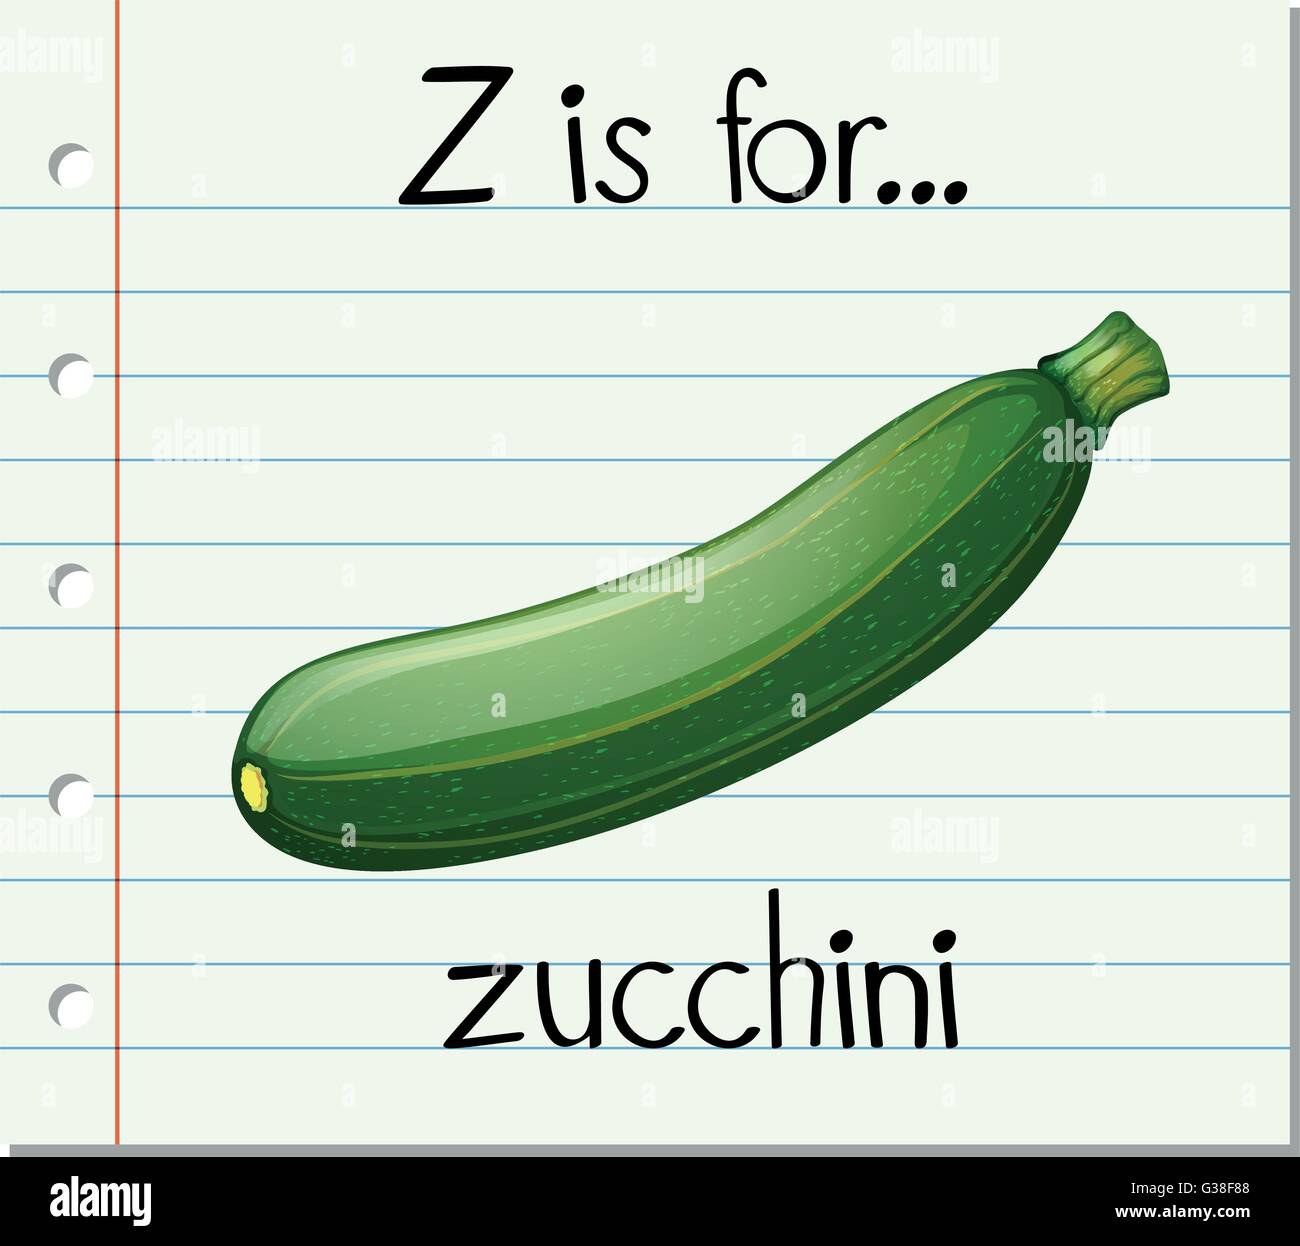 Flashcard letter Z is for zucchini illustration Stock Vector